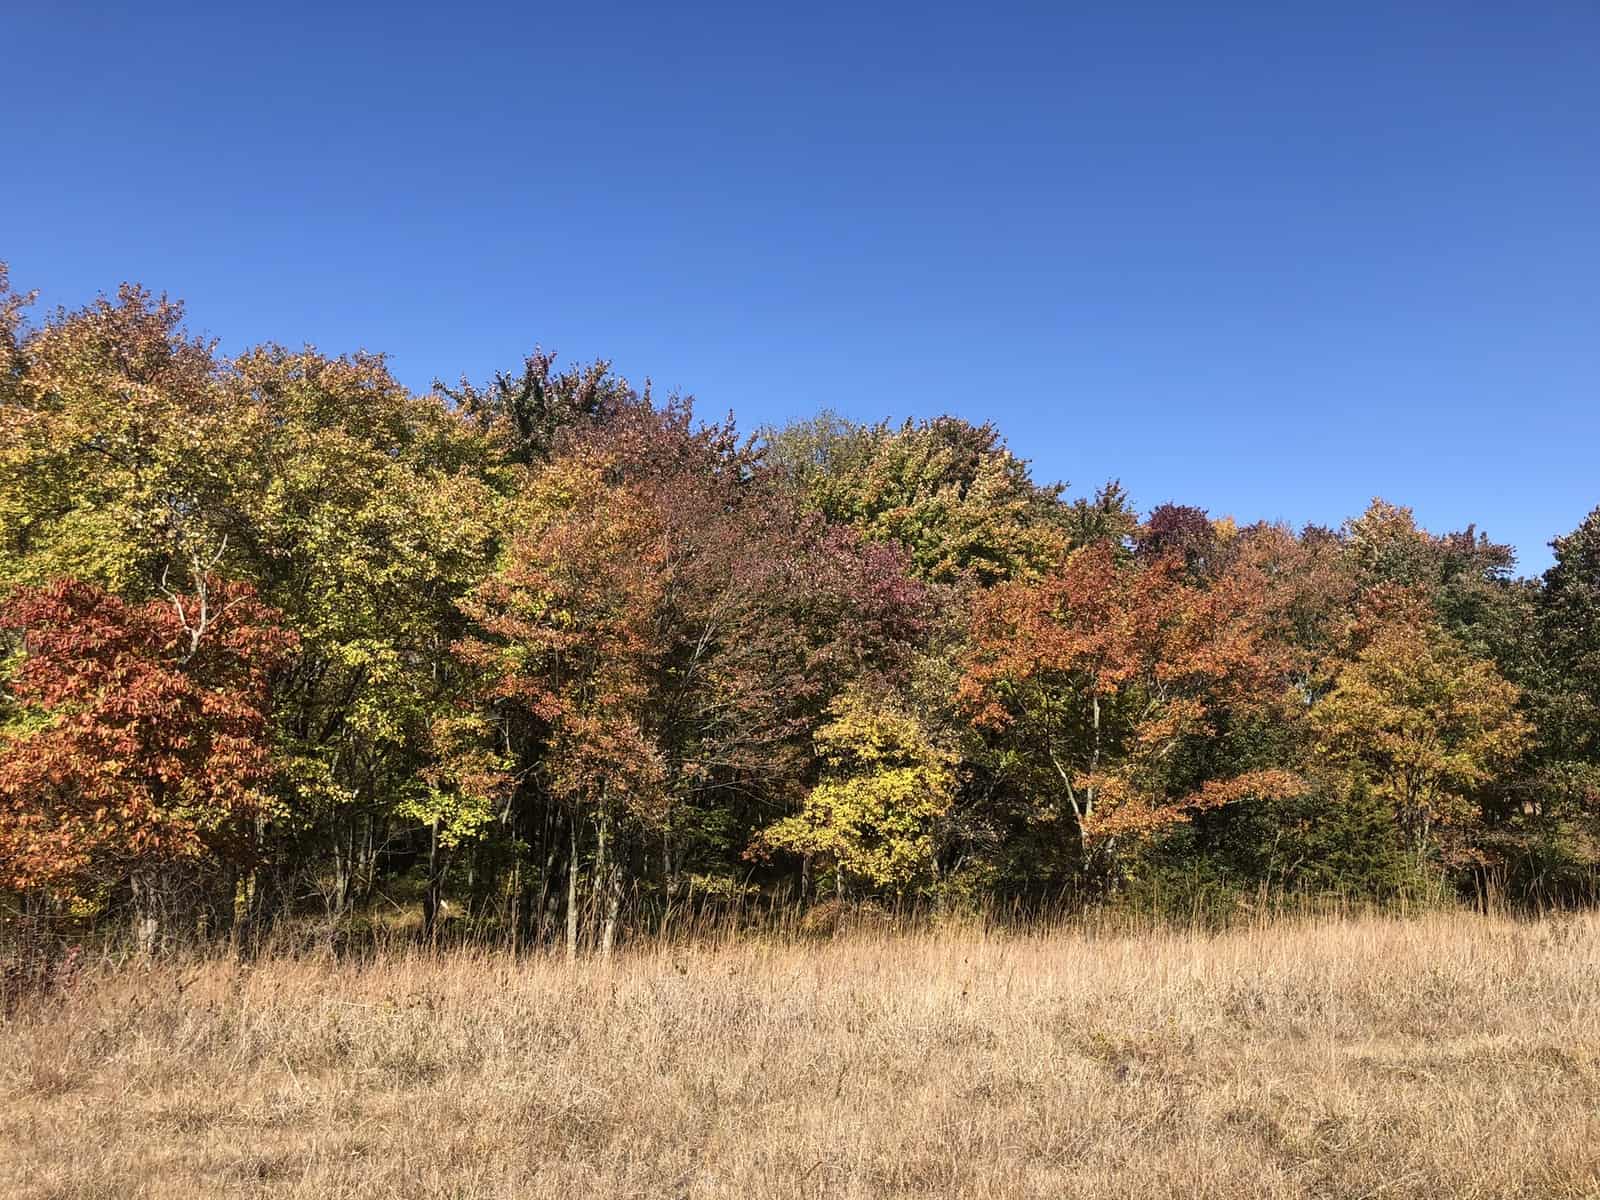 Fall foliage on the trees at Willisbrook; a brown grassland field and bright leaves in red, orange, yellow, magenta and green.